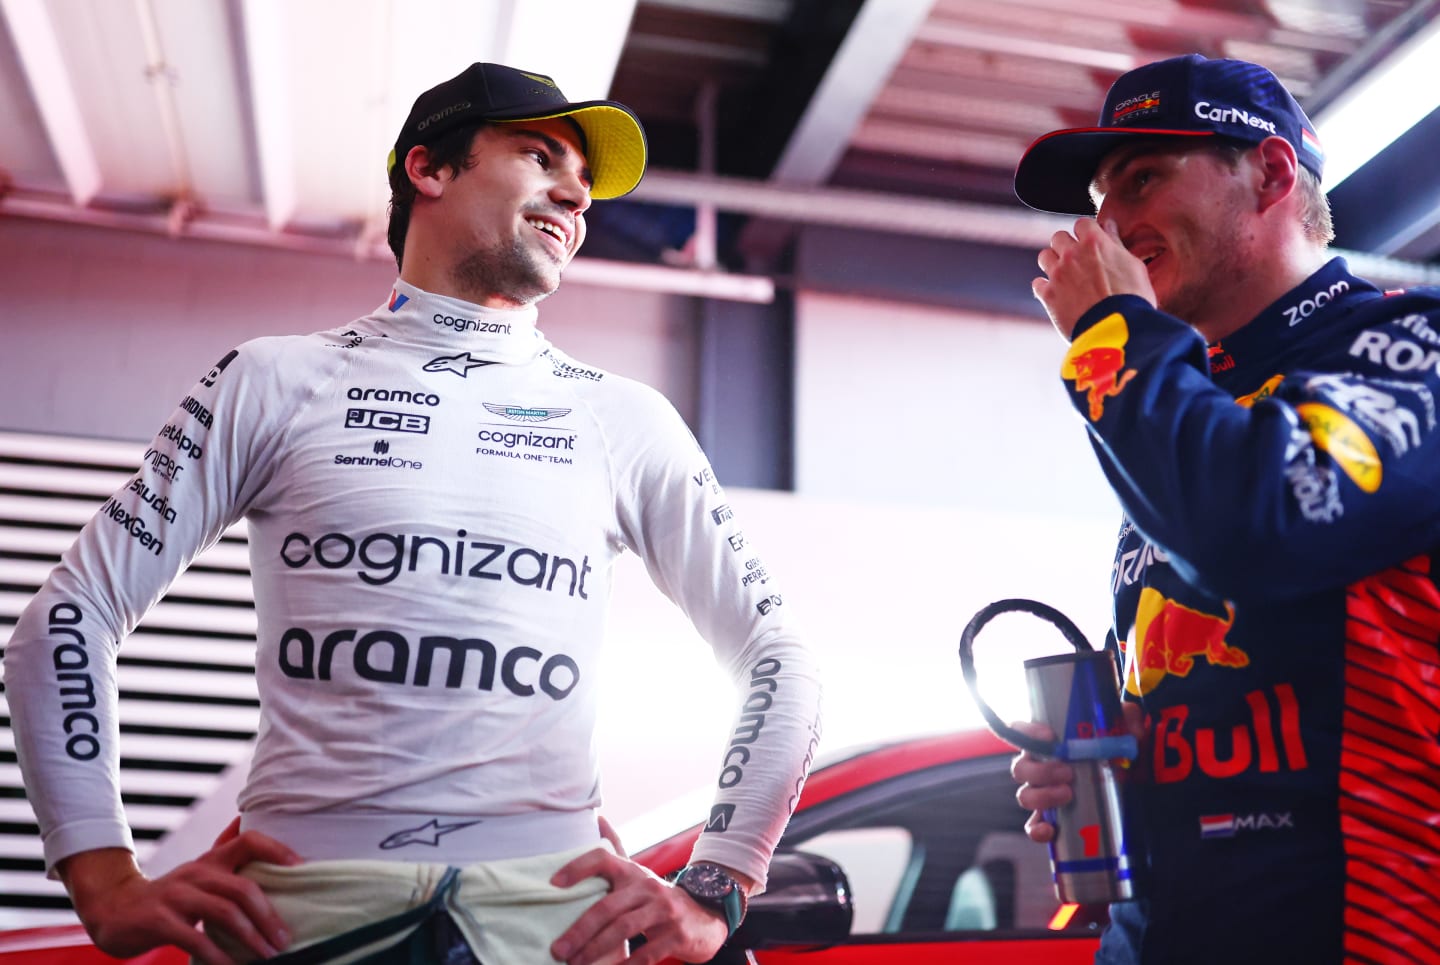 SAO PAULO, BRAZIL - NOVEMBER 03: Pole position qualifier Max Verstappen of the Netherlands and Oracle Red Bull Racing and third placed qualifier Lance Stroll of Canada and Aston Martin F1 Team talk in the FIA Garage after qualifying ahead of the F1 Grand Prix of Brazil at Autodromo Jose Carlos Pace on November 03, 2023 in Sao Paulo, Brazil. (Photo by Dan Istitene - Formula 1/Formula 1 via Getty Images)